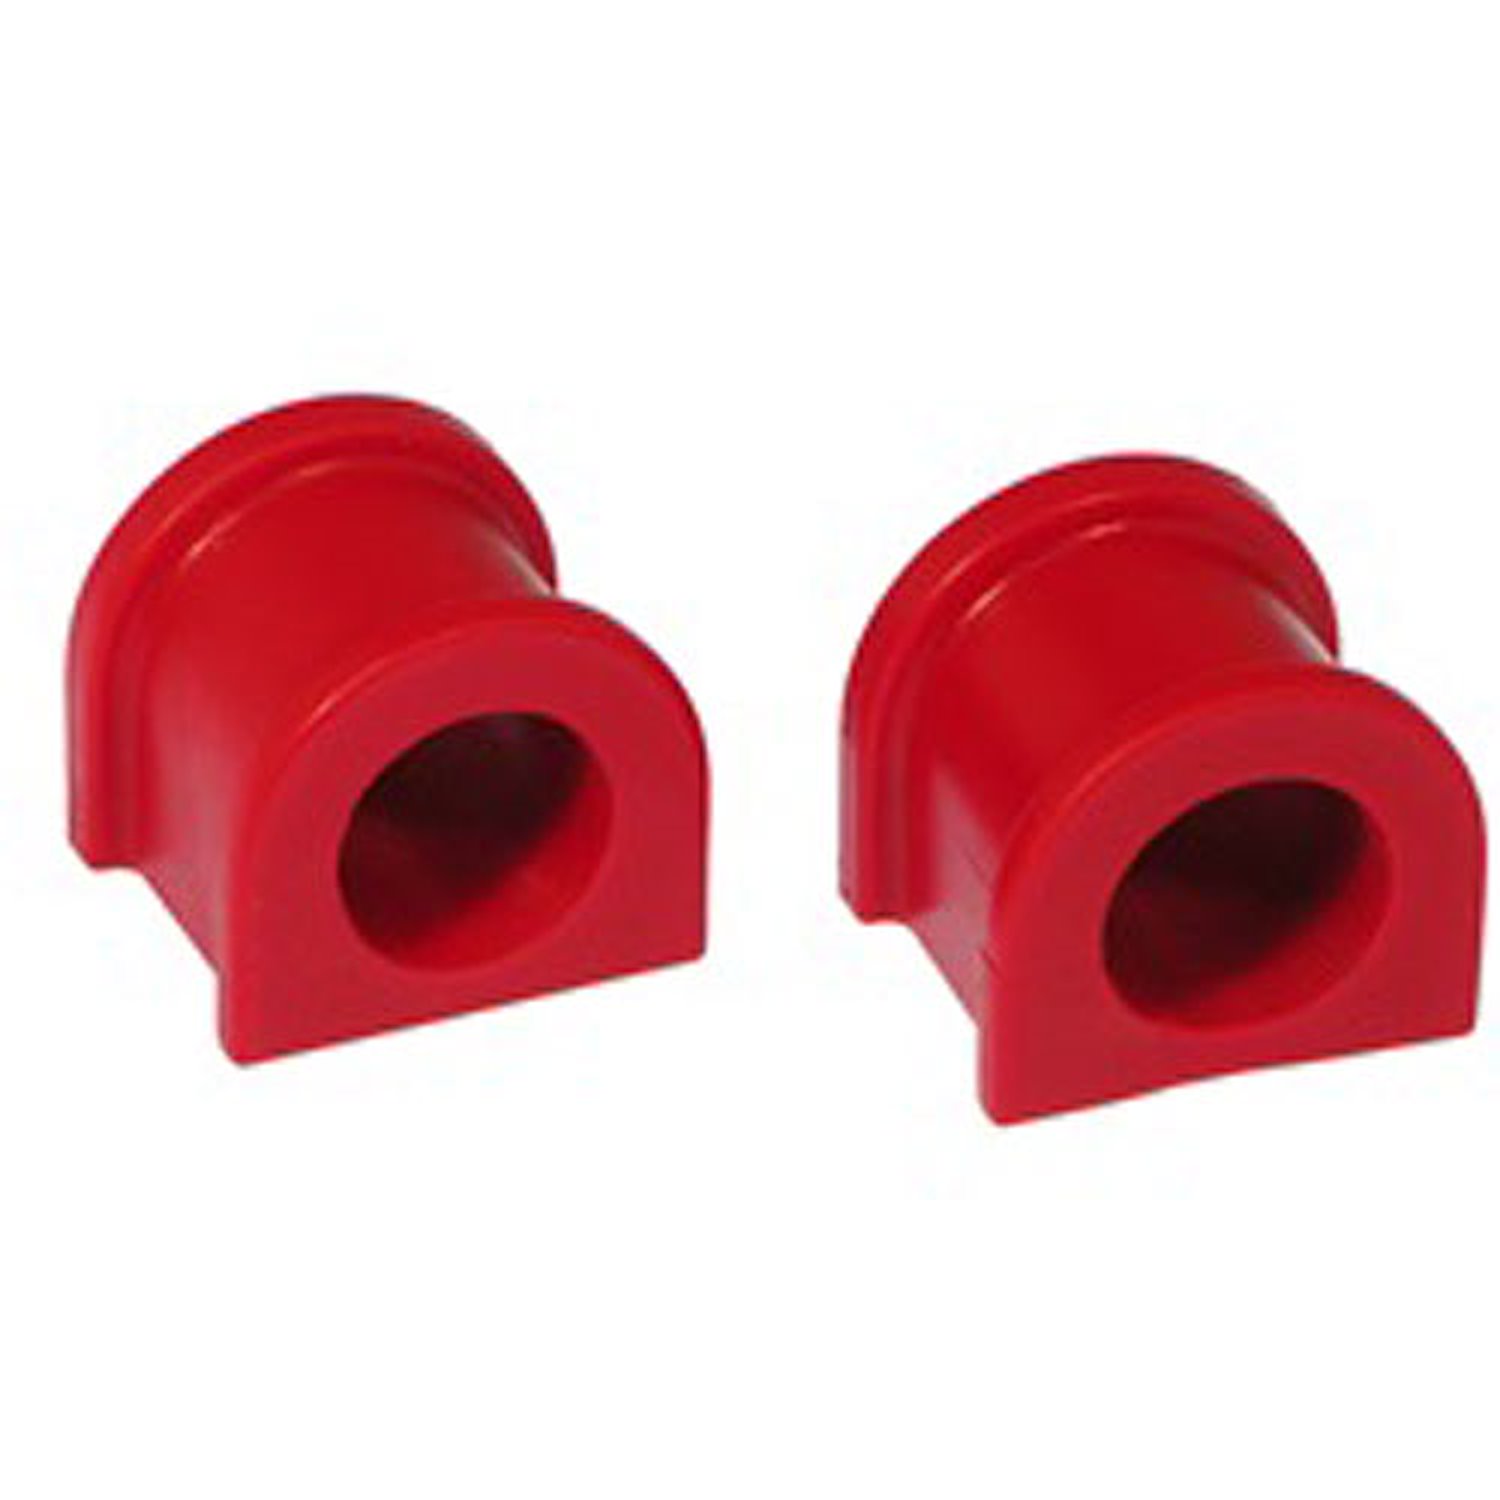 EVO 8 FRONT 24MM SWAY BAR BUSHINGS Red